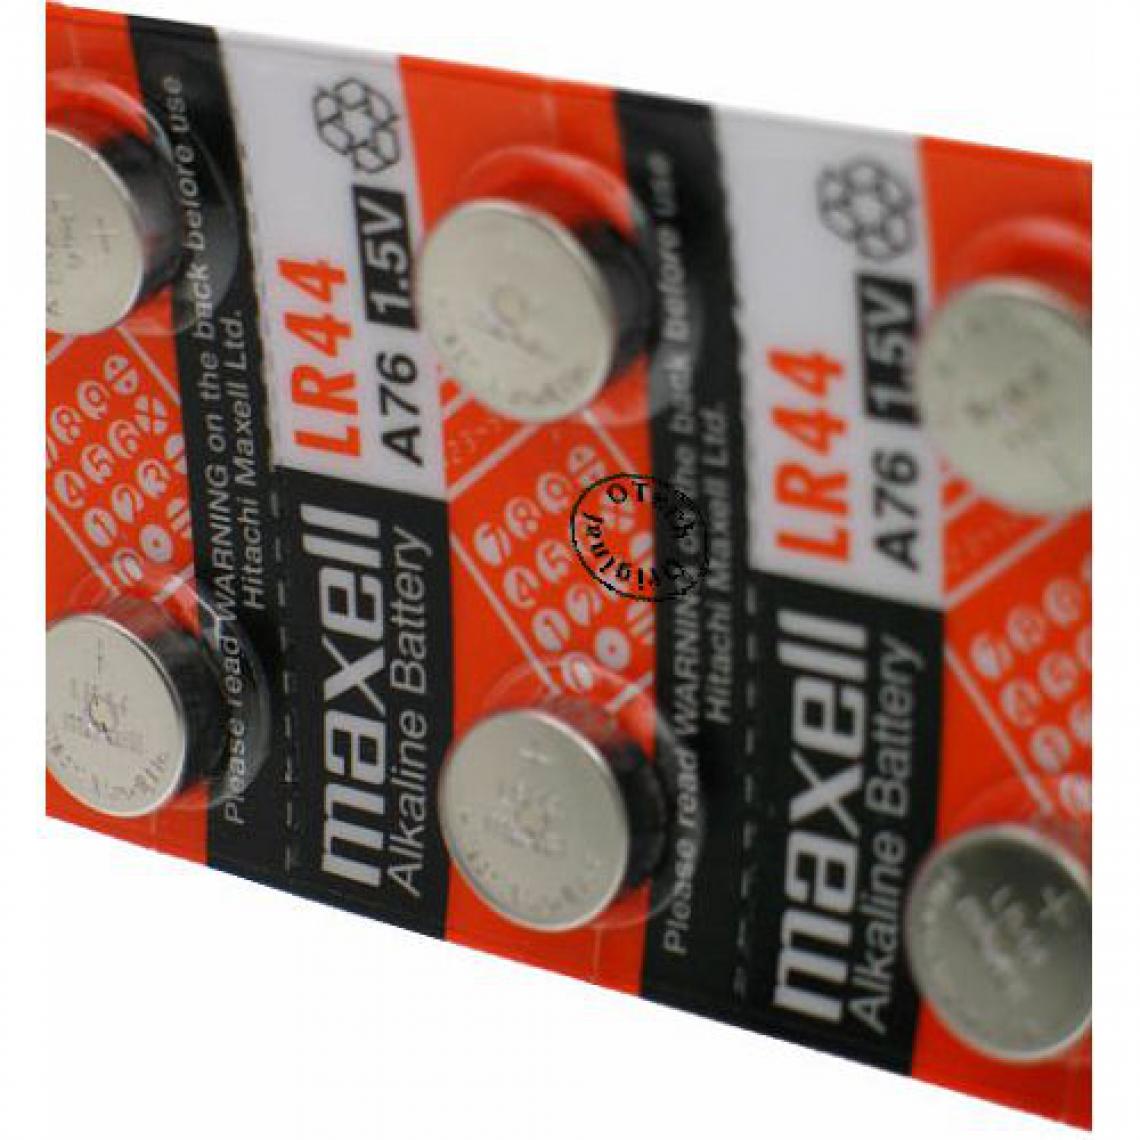 Otech - Pack de 10 piles maxell pour MAXELL RW82 - Piles rechargeables